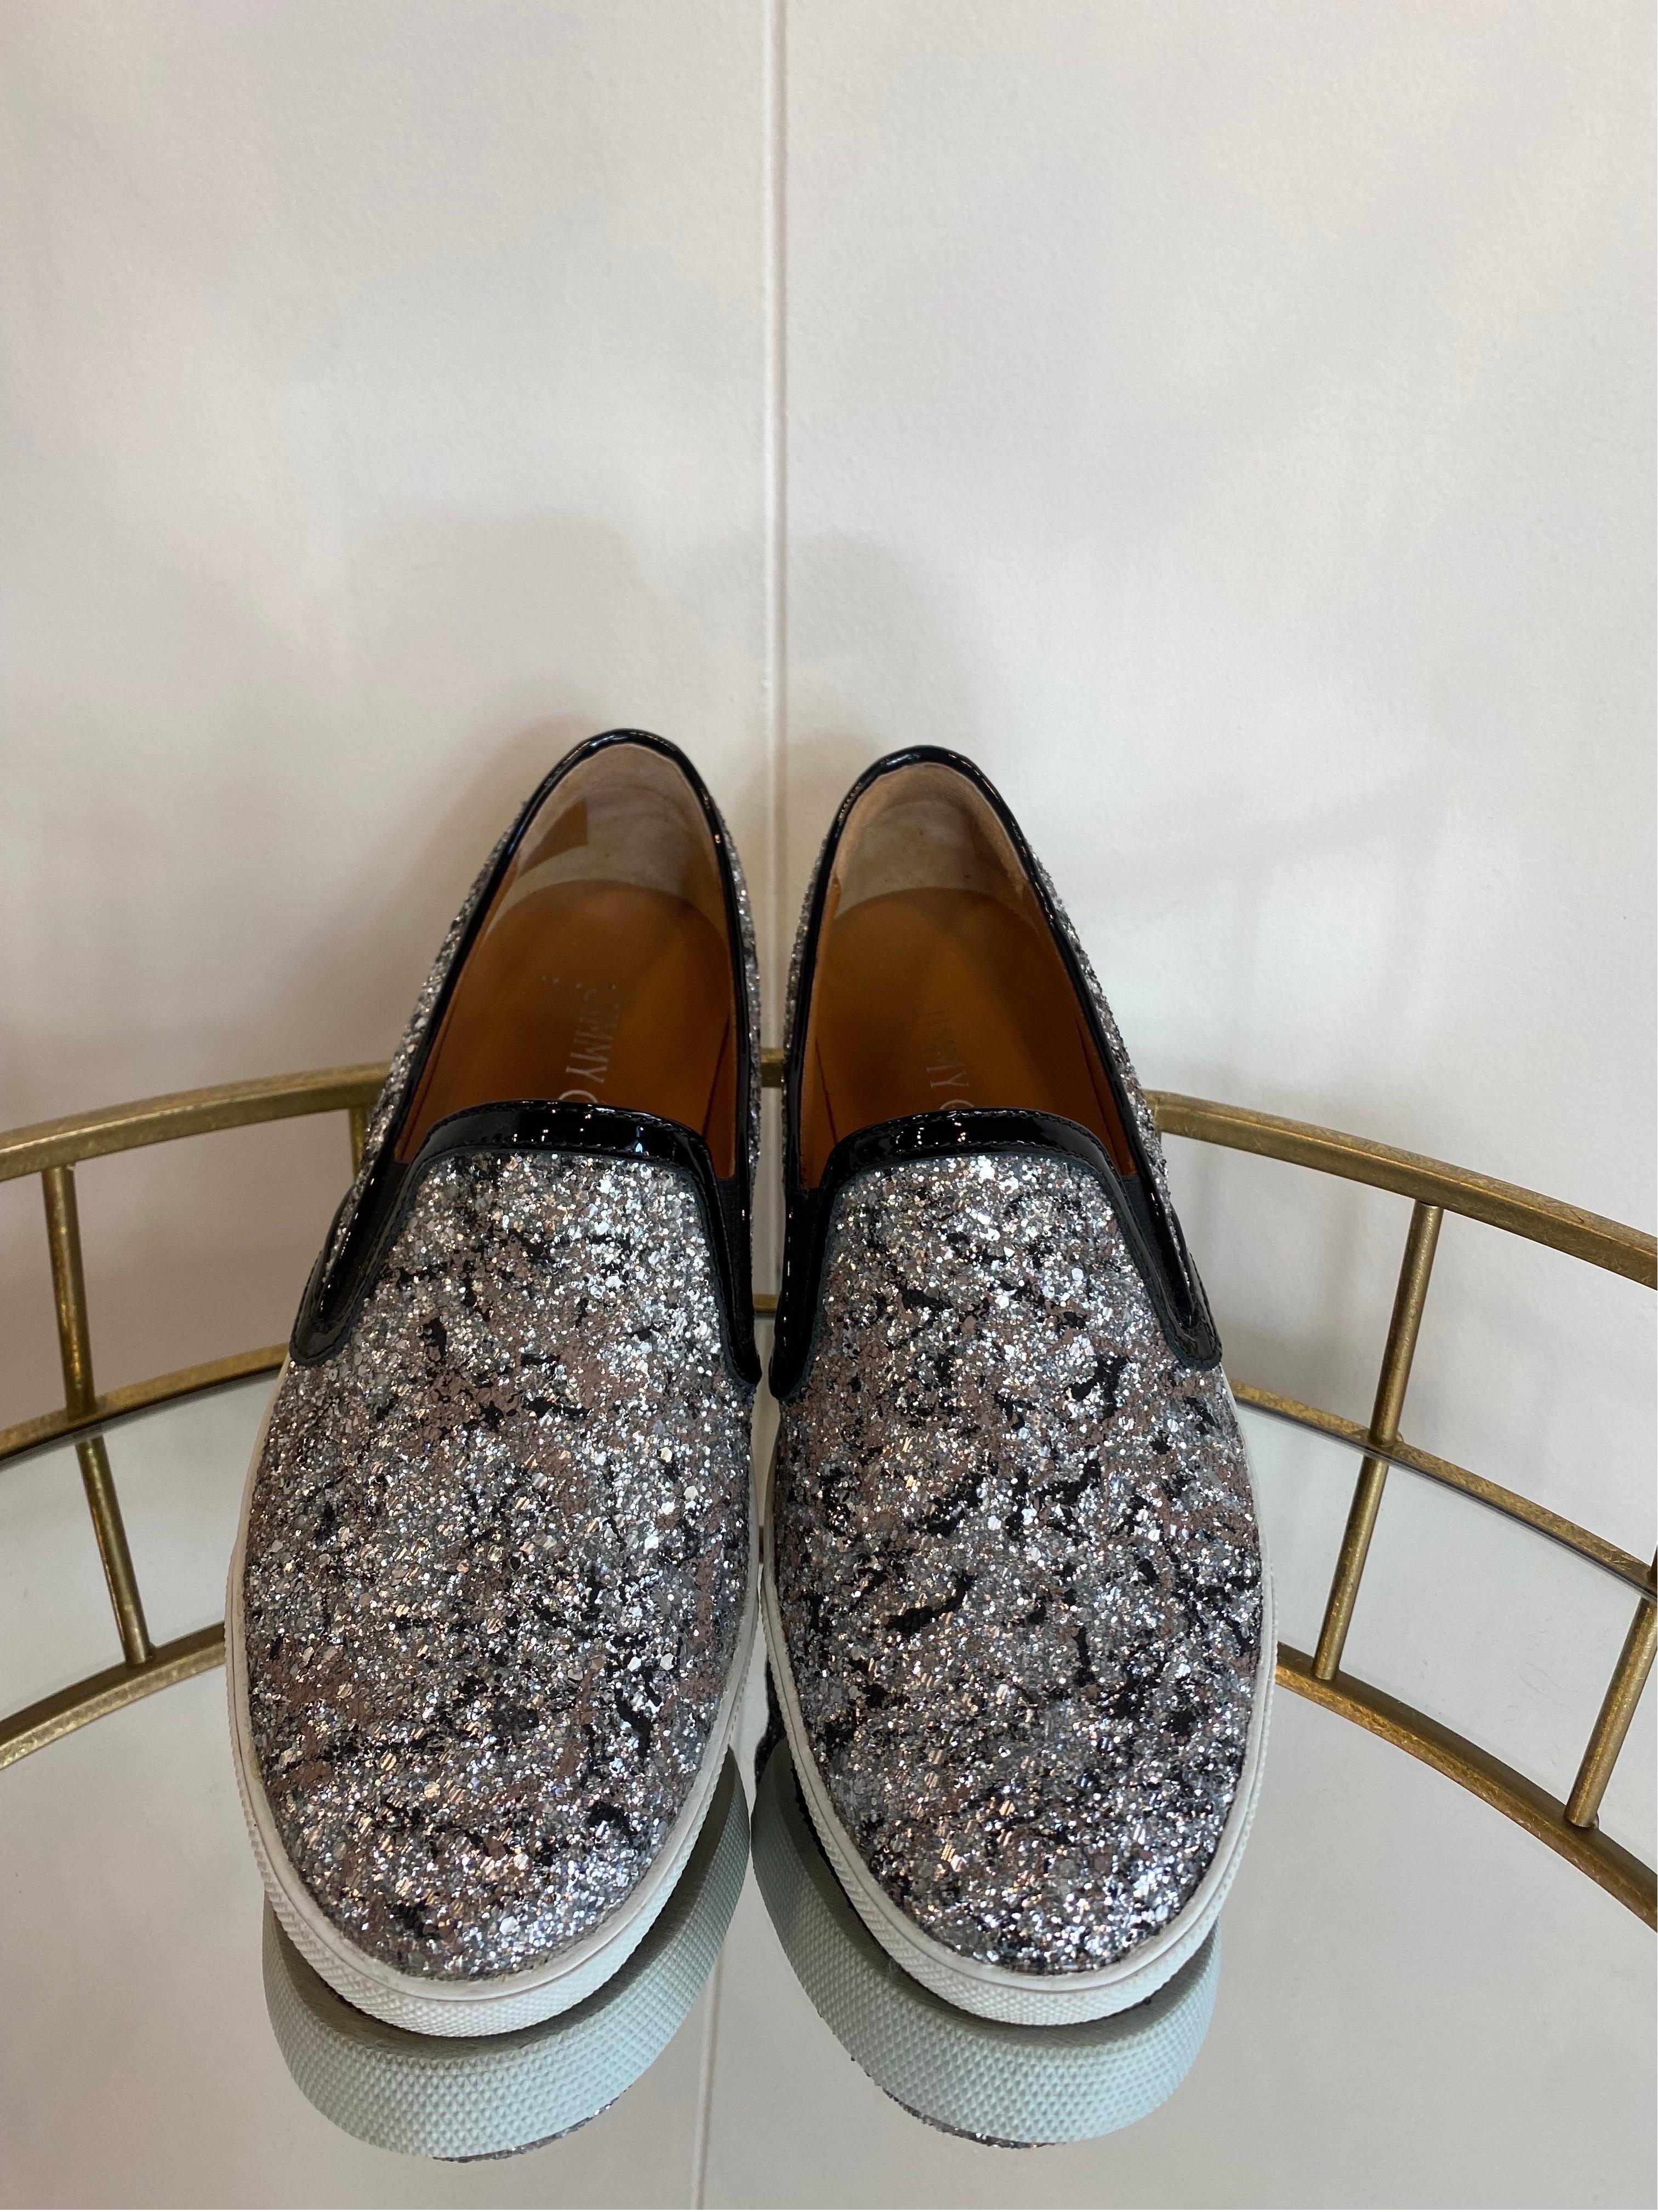 Slip on Jimmy Choo pailettes  In Excellent Condition For Sale In Carnate, IT